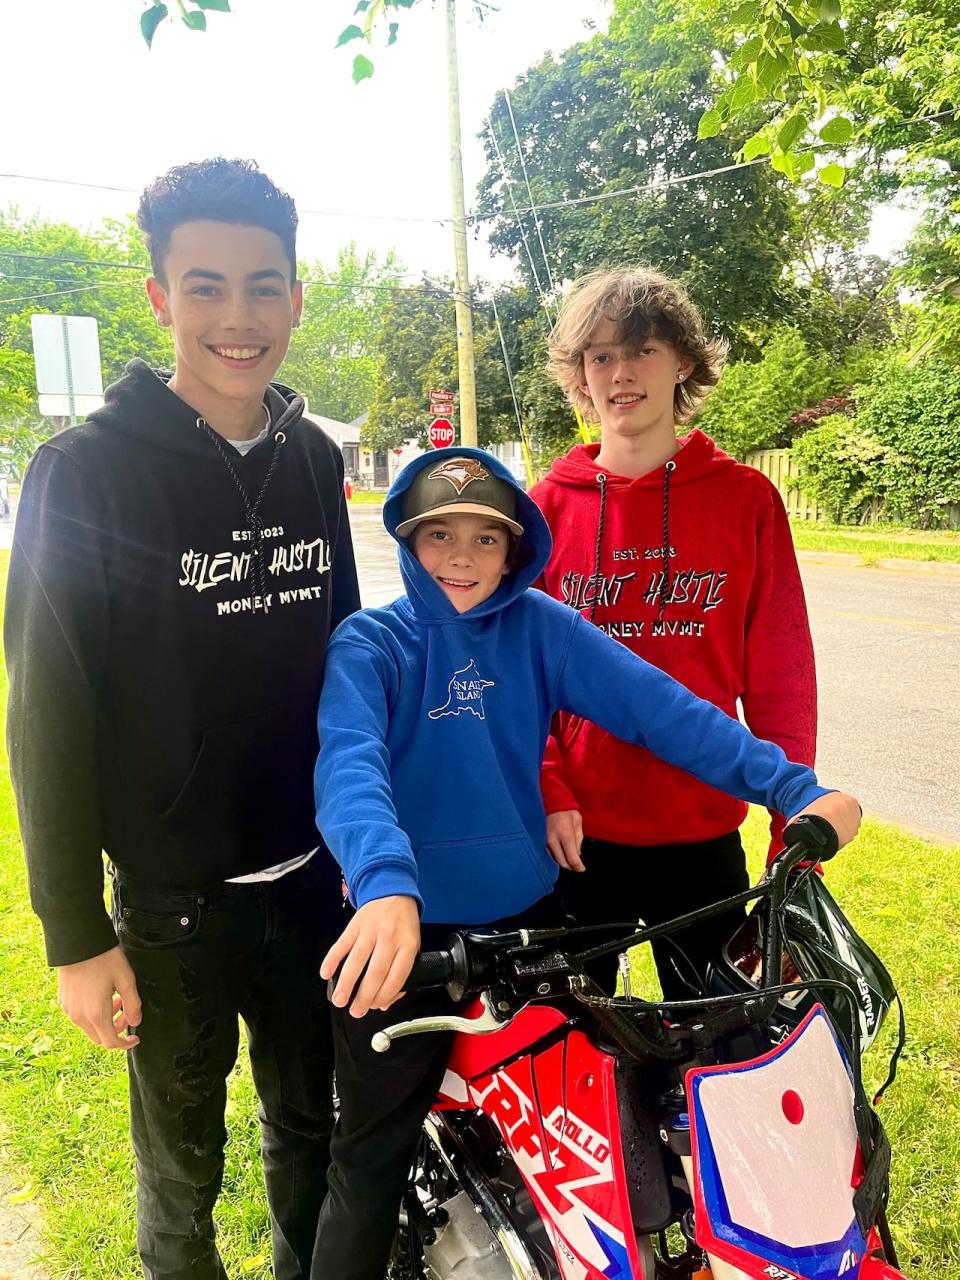 Eli with his brothers Keirron (left) and Liam (right) on the dirt bike they gifted him last year. He had an accident on the bike which punctured his abdomen. During the treatment, doctors found a tumour which later turned out to be a rare form of cancer. 